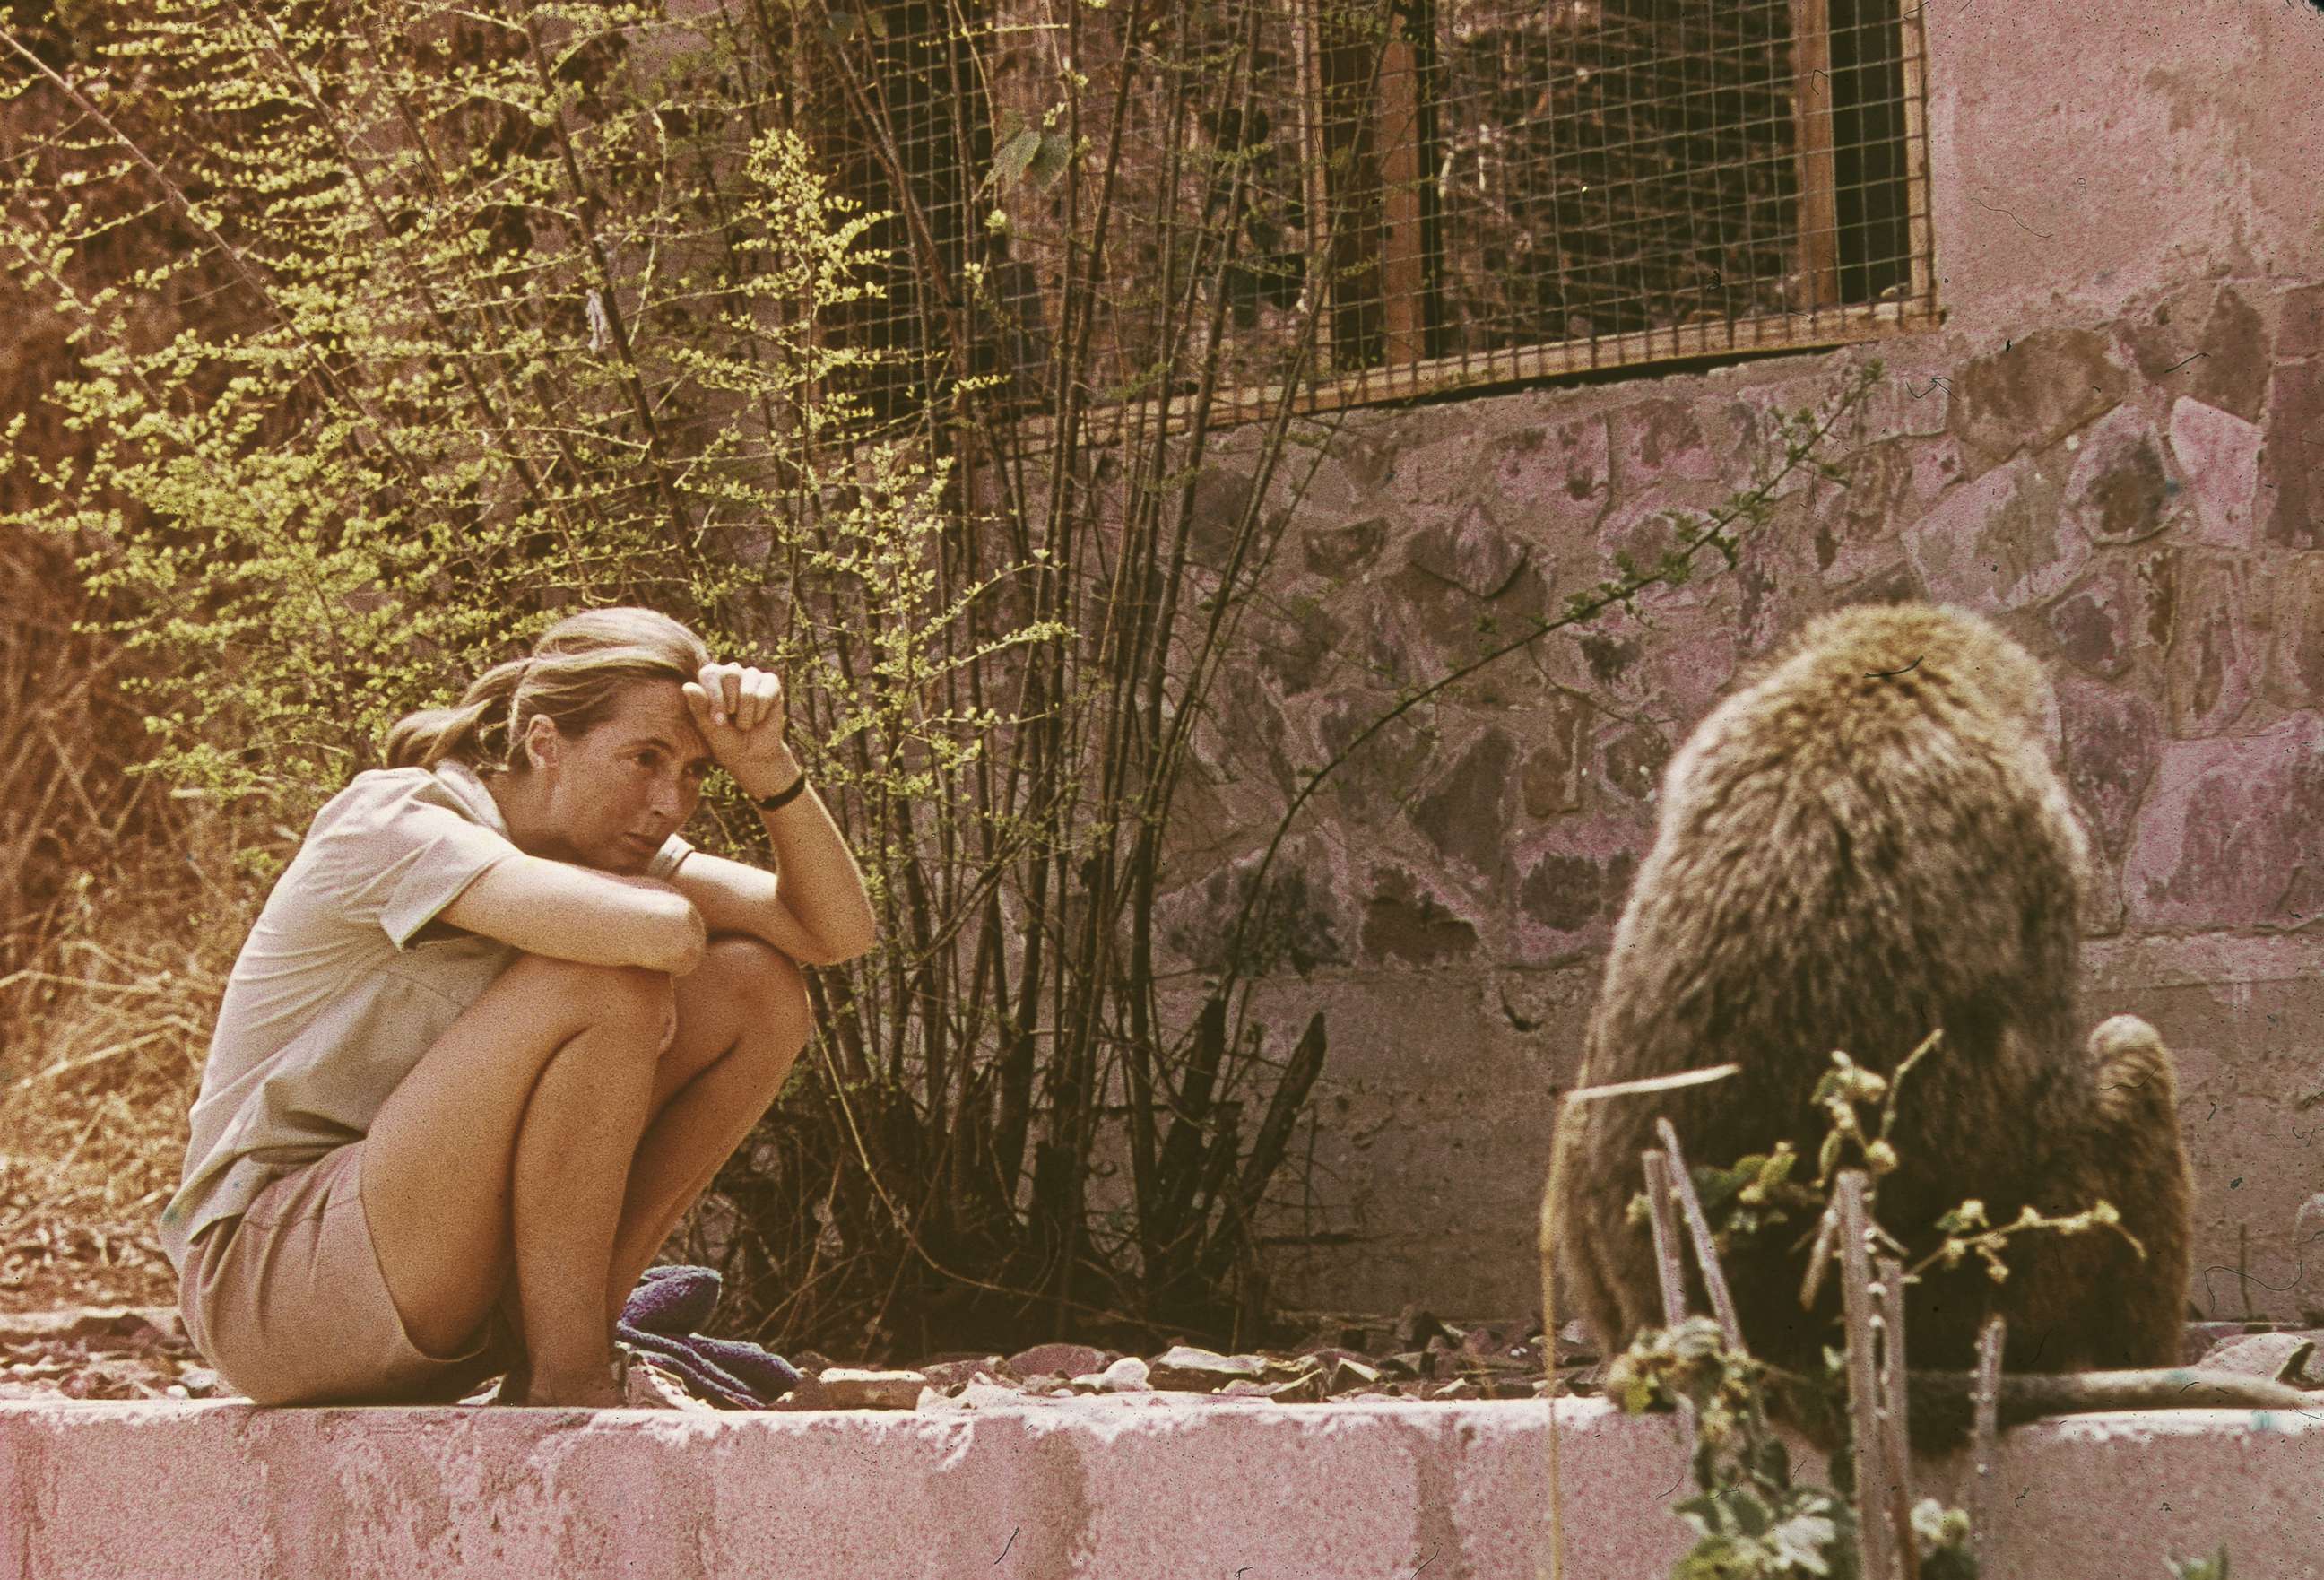 PHOTO: In this 1974 file photo, Jane Goodall sits outdoors and studies an African baboon.